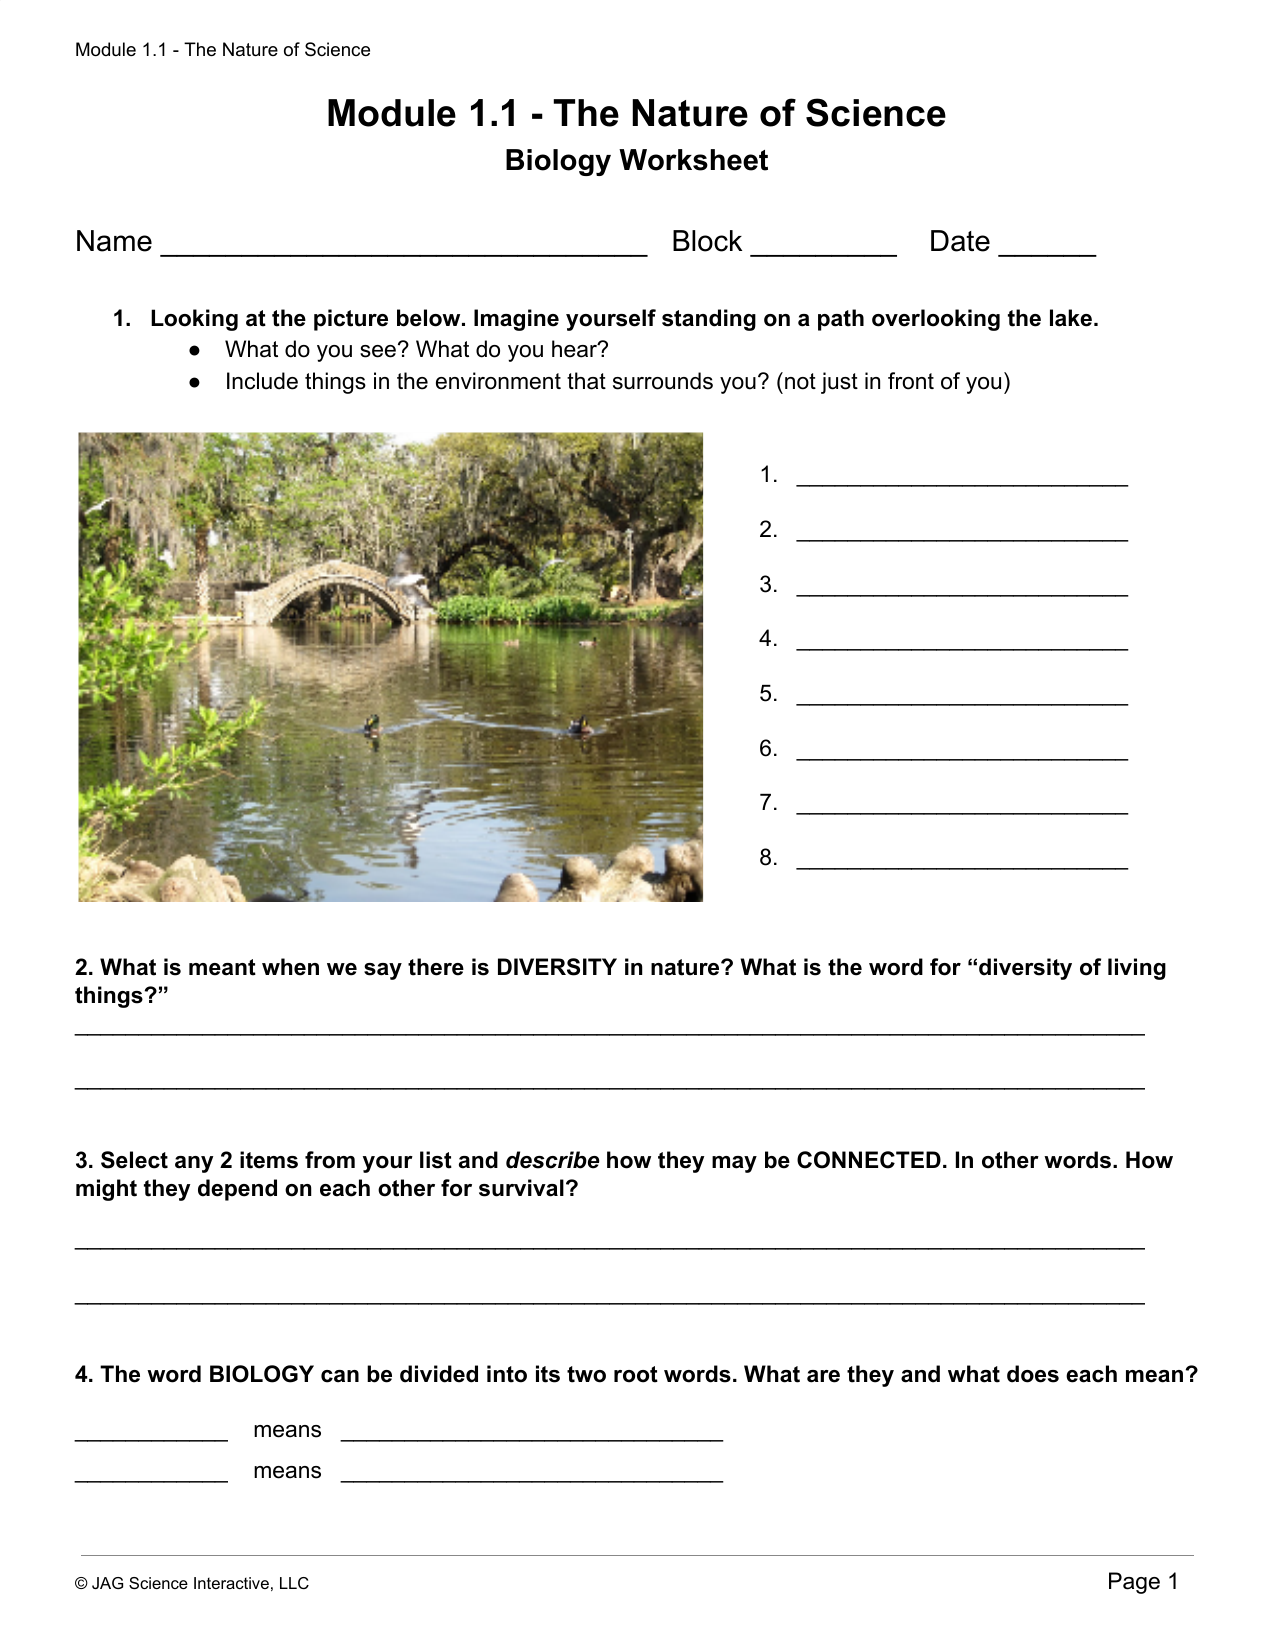 Module 221.221 Worksheet - The Nature of Science Within The Nature Of Science Worksheet